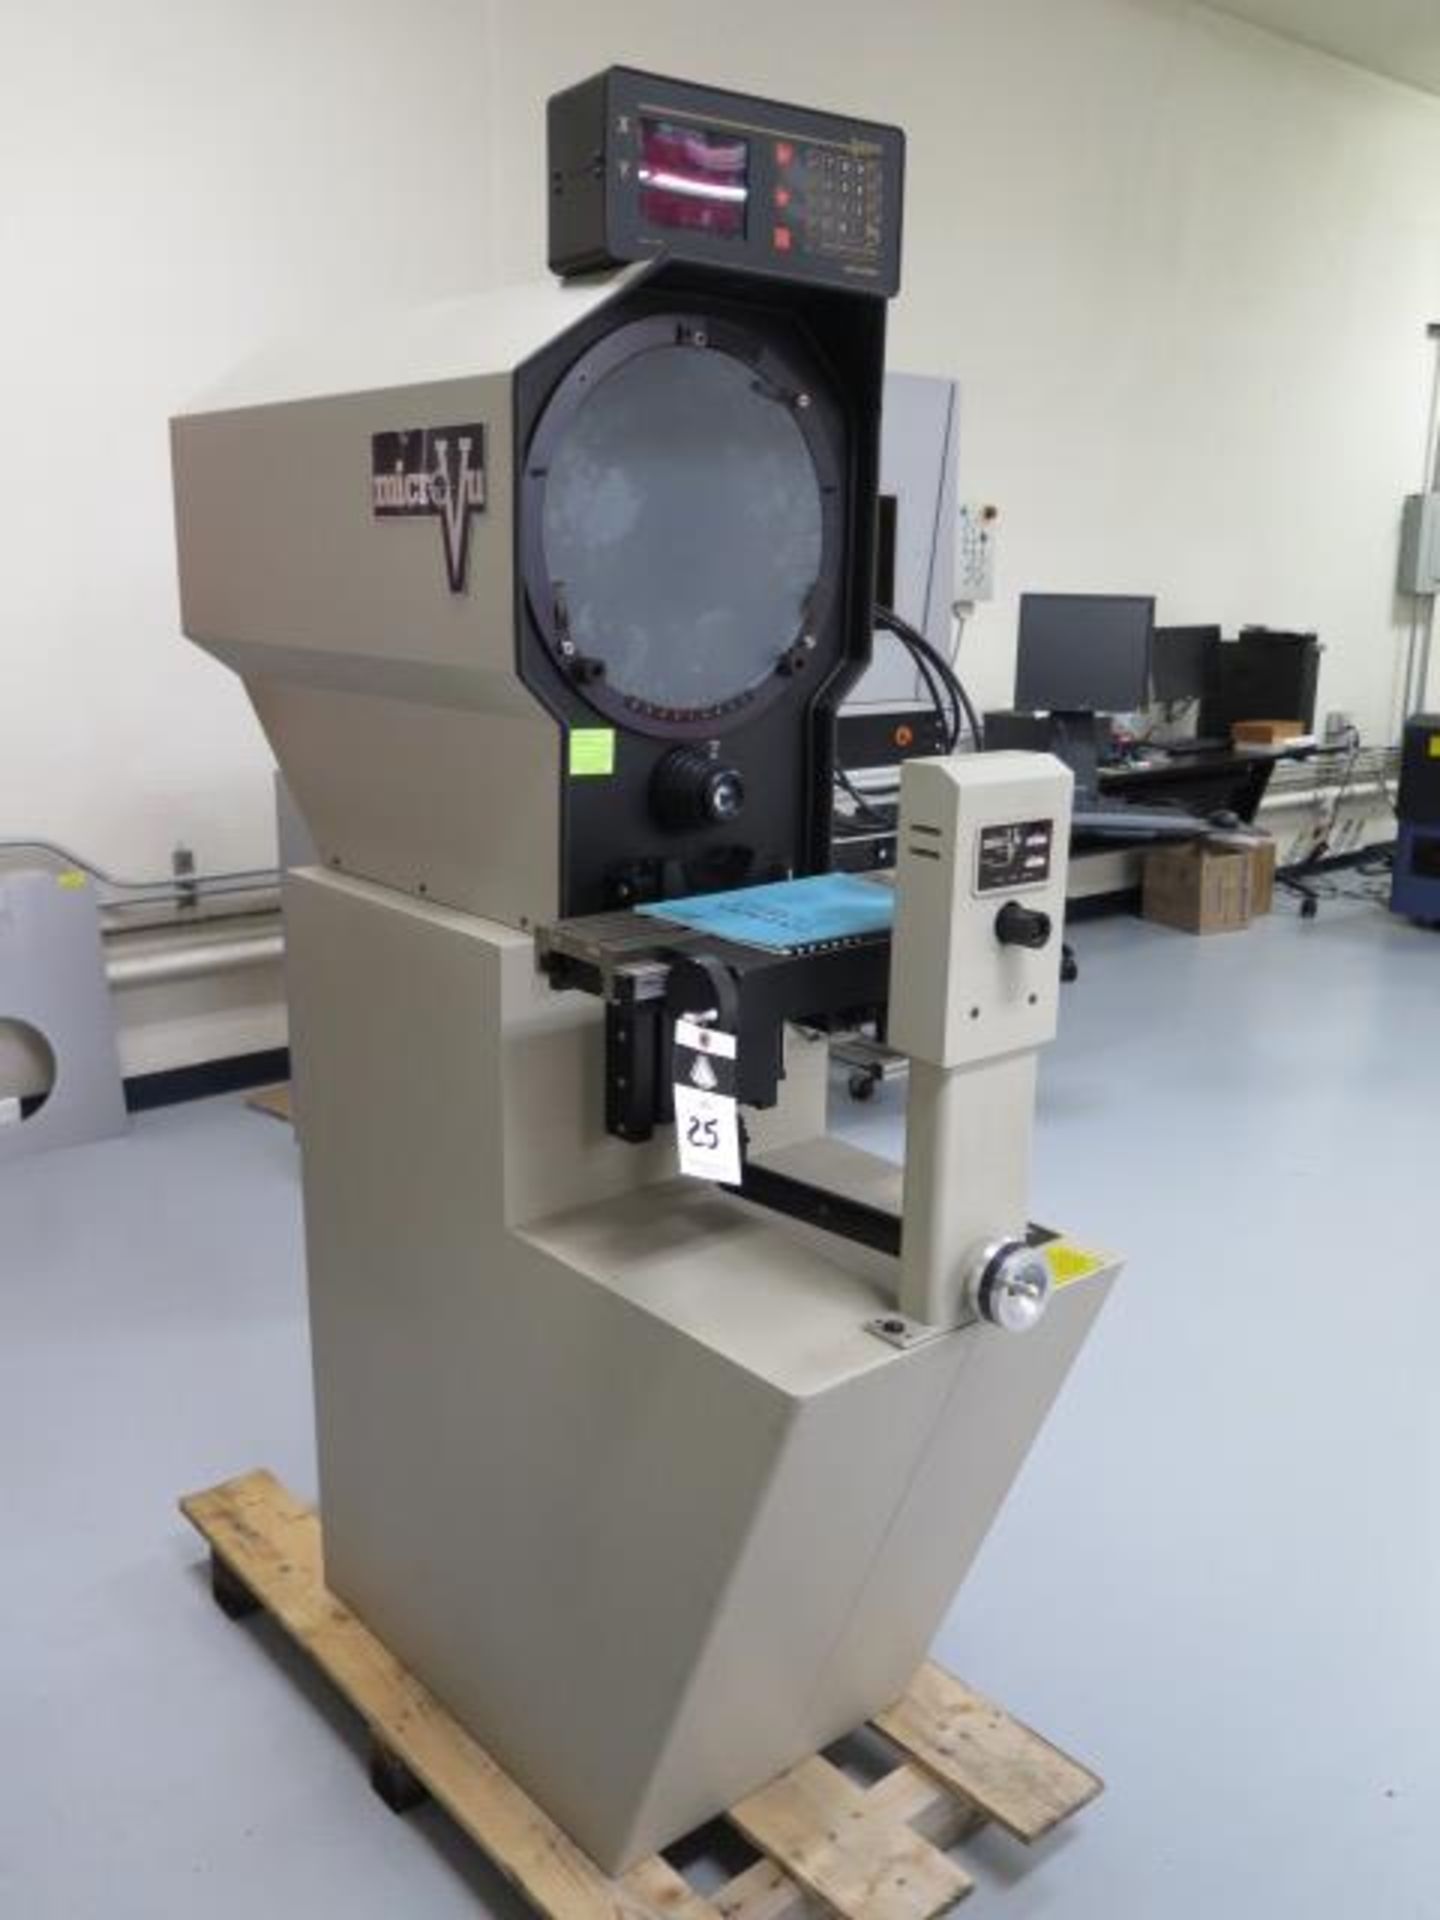 MicroVu mdl. H-14 14” Optical Comparator s/n 3328 w/ Sargon DRO, Surface and Profile, SOLD AS IS - Image 3 of 9